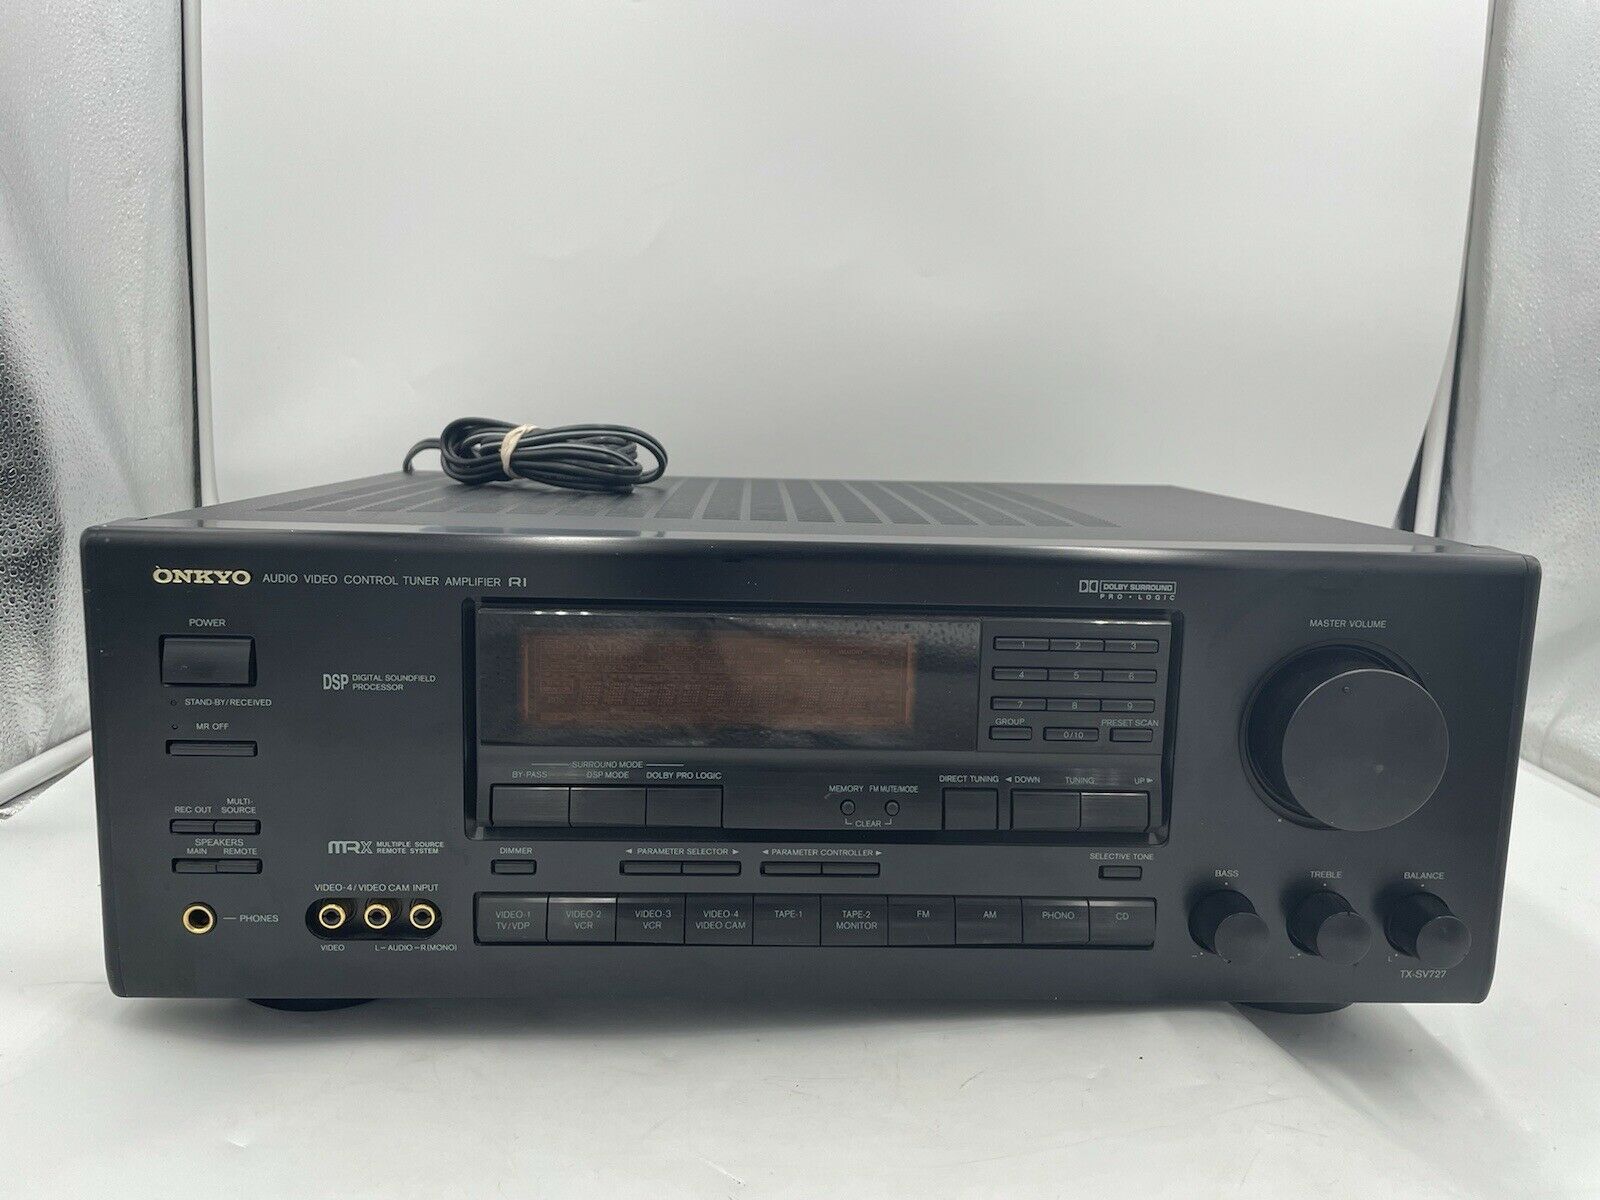 Primary image for onkyo TX-SV727 amplifier